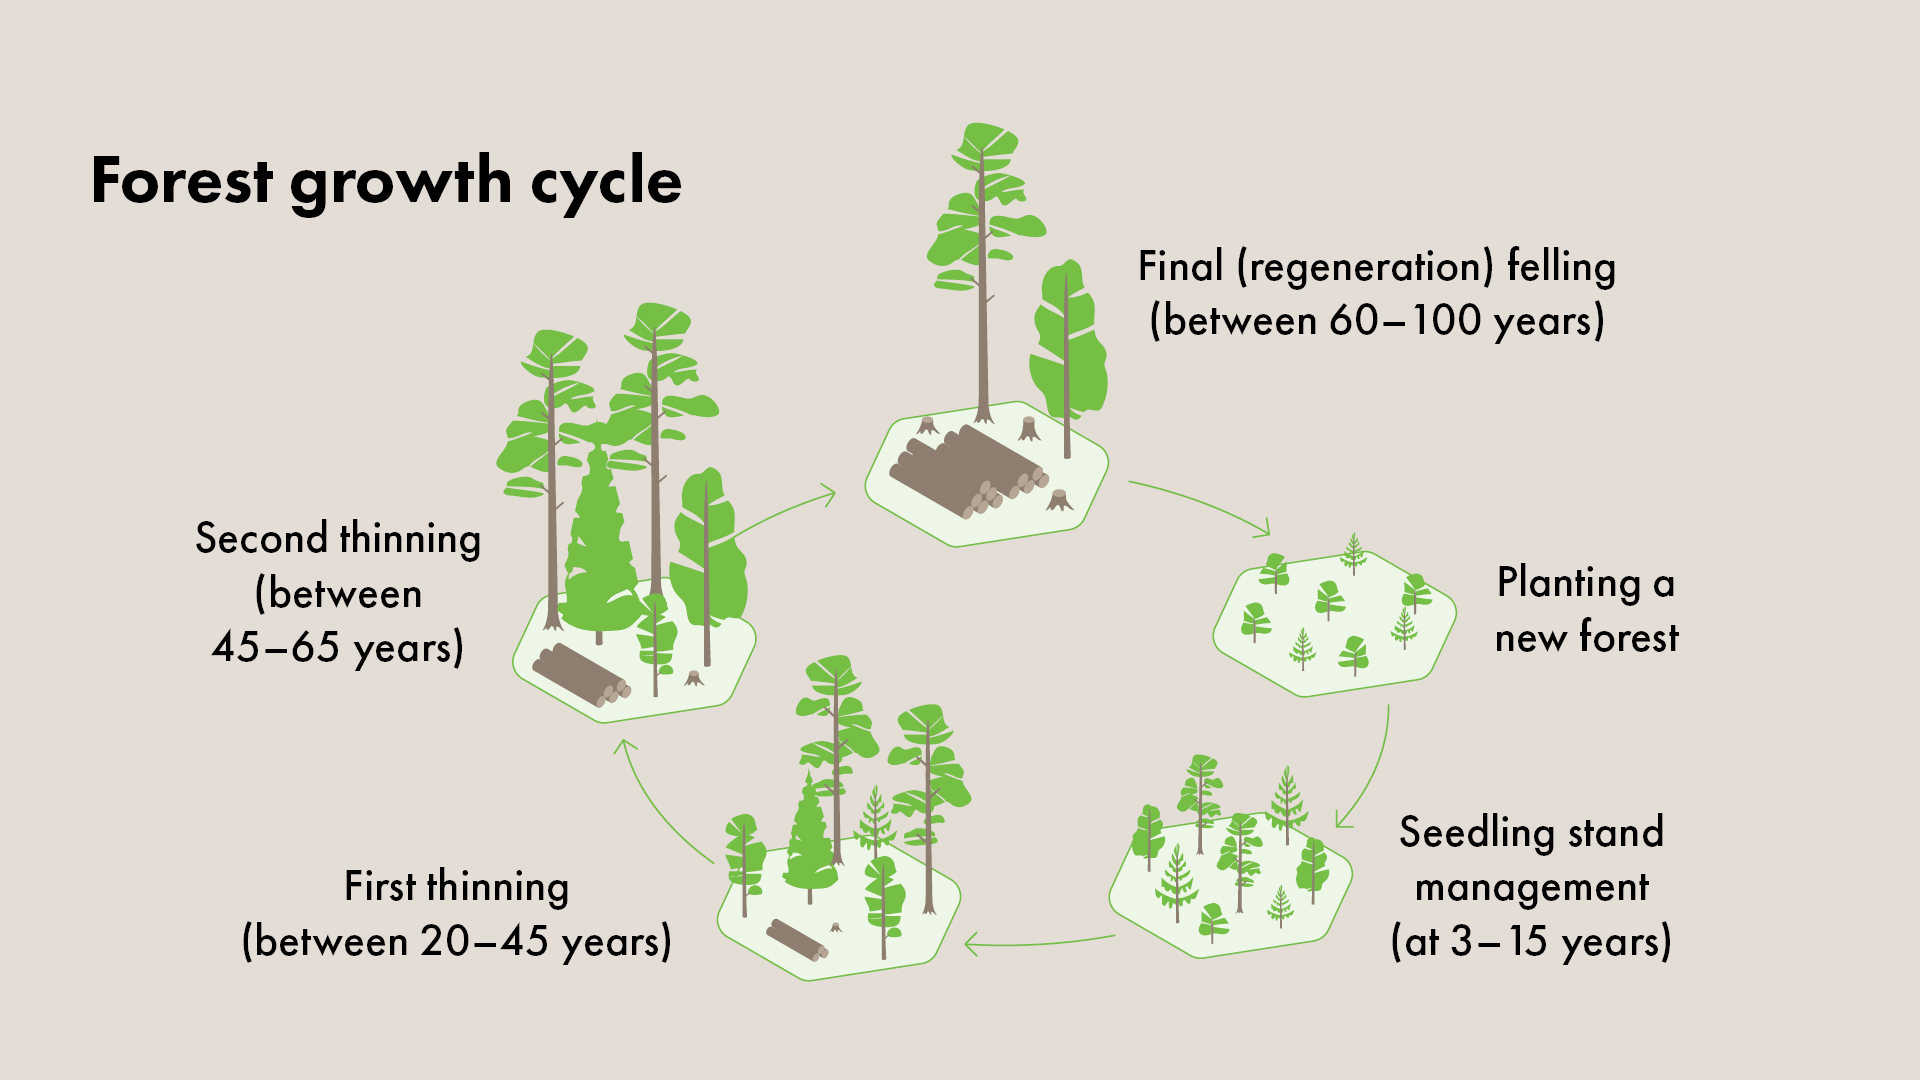 FOR-Forest-growth-cycle1920x1080.png